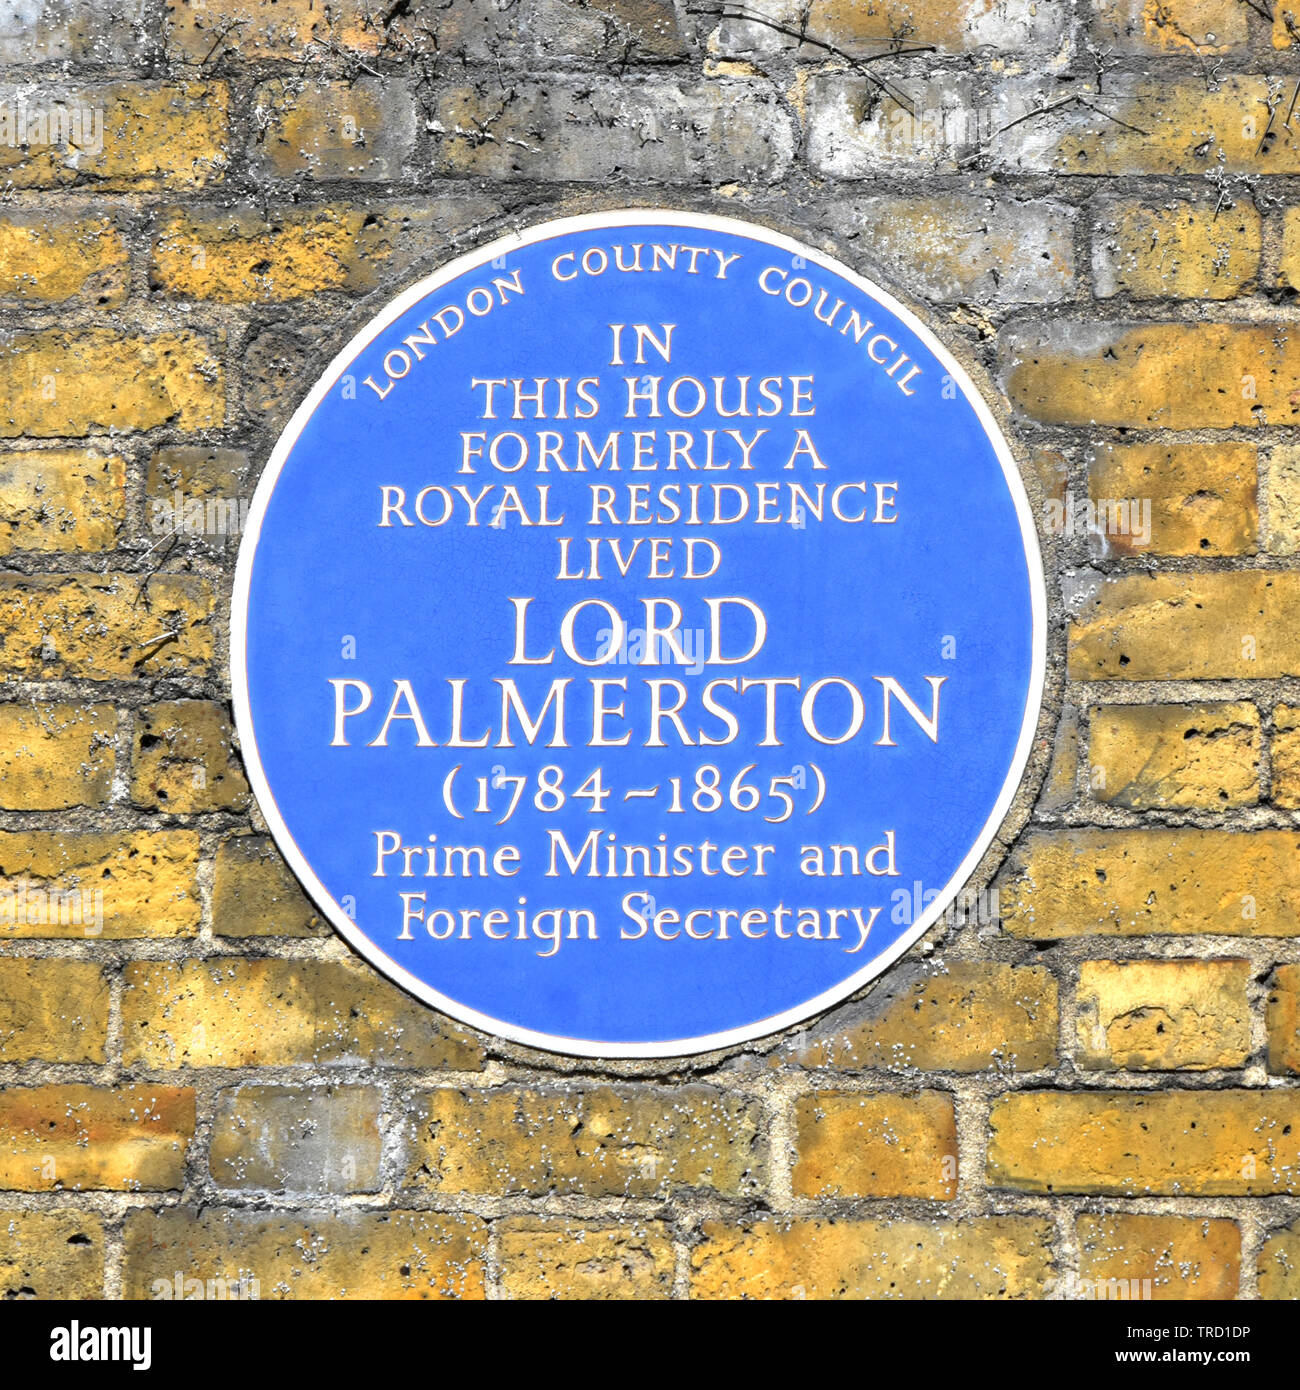 London County Council famous people blue brick wall plaque lived at this house historical fame of  Prime Minister Lord Palmerston London England UK Stock Photo